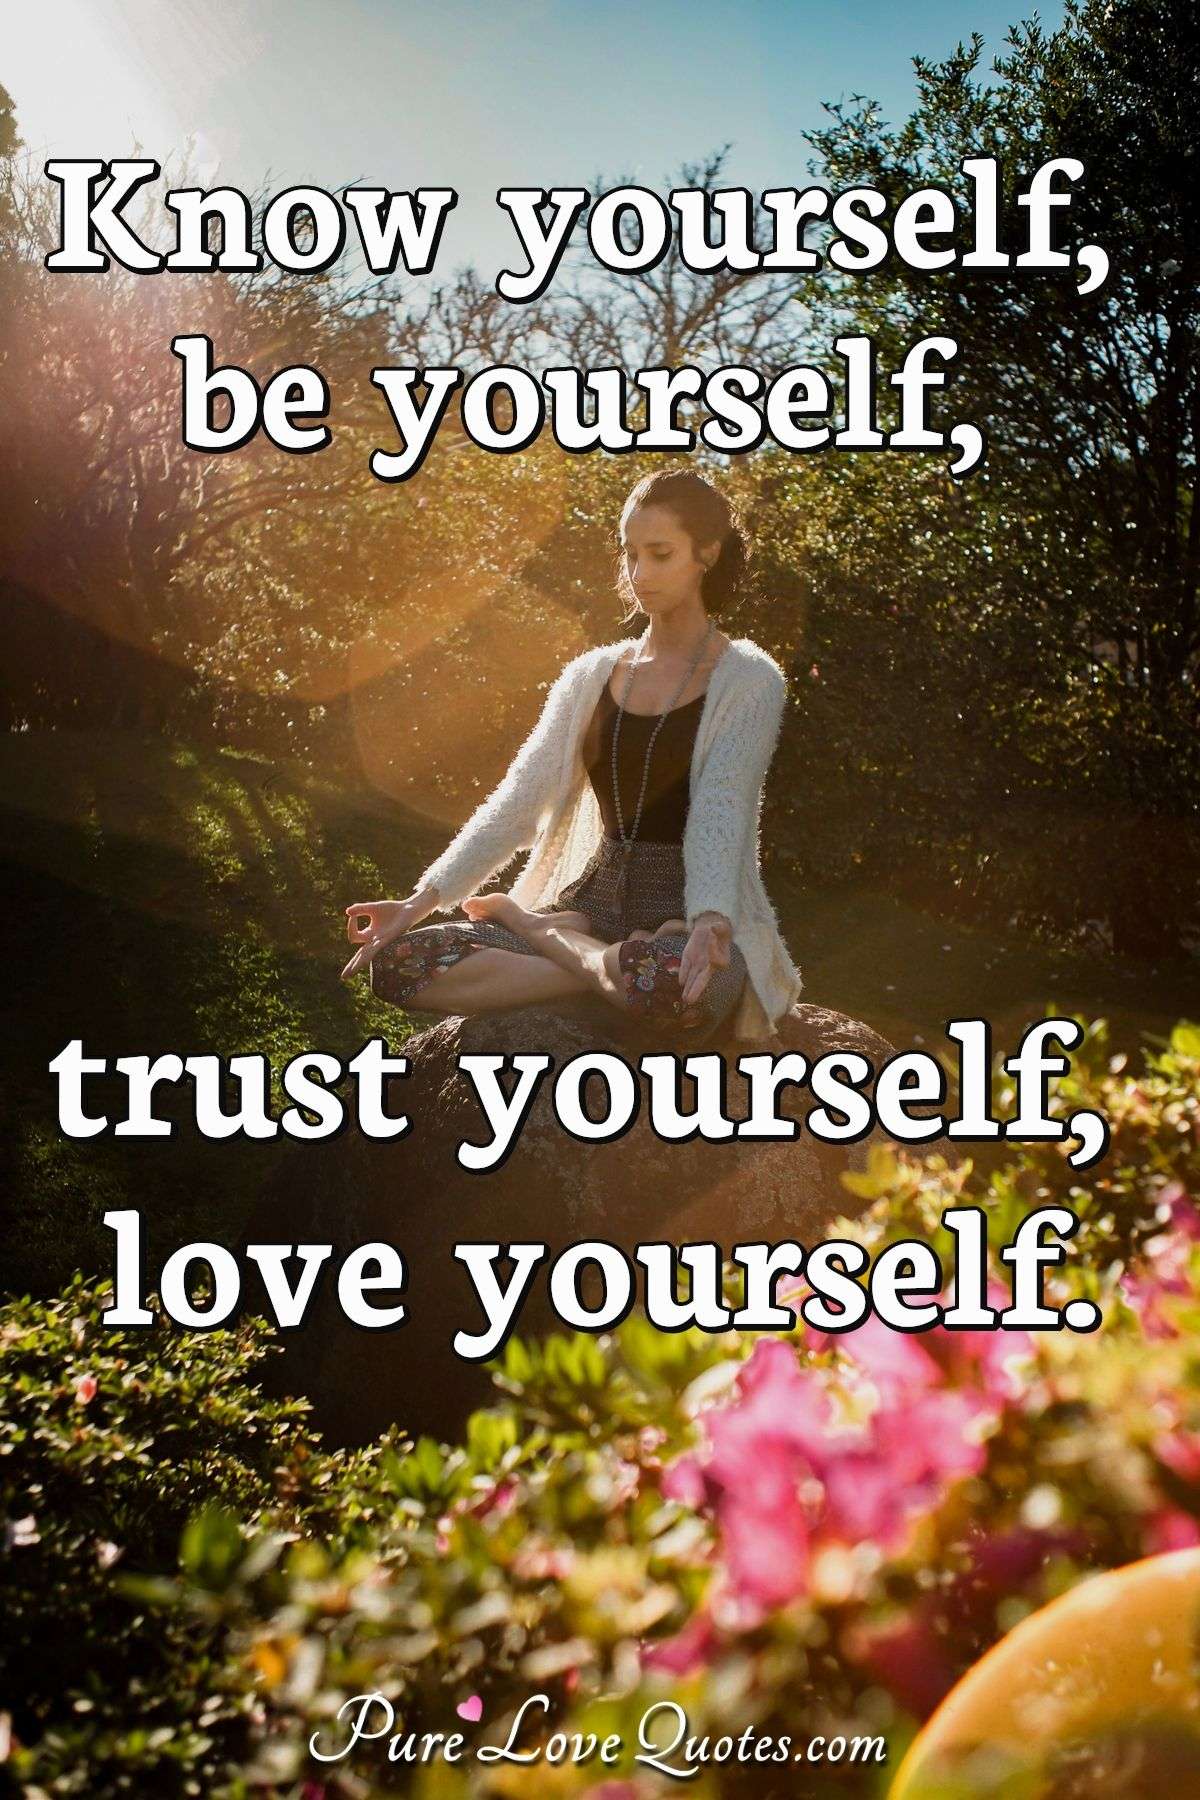 Know yourself, be yourself, trust yourself, love yourself. - Anonymous